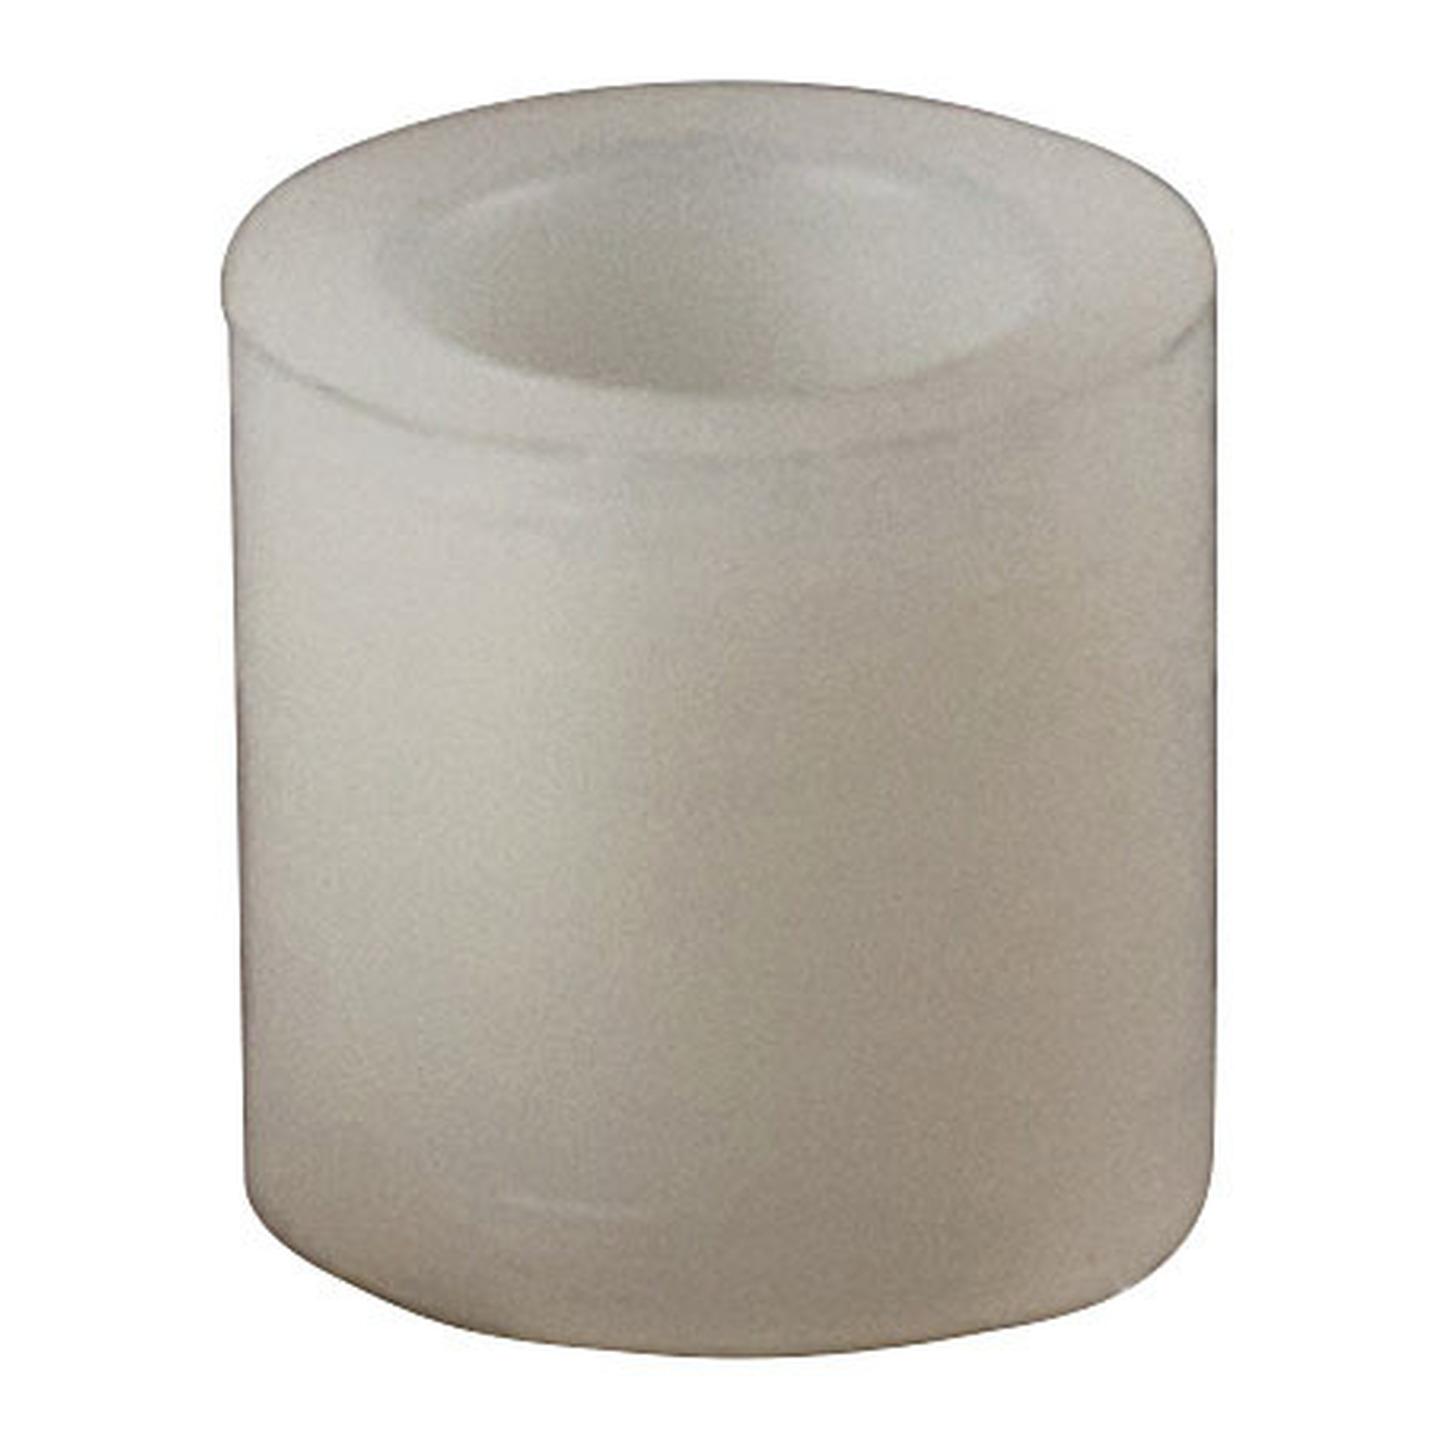 6mm Untapped Nylon Spacers - Pack of 25